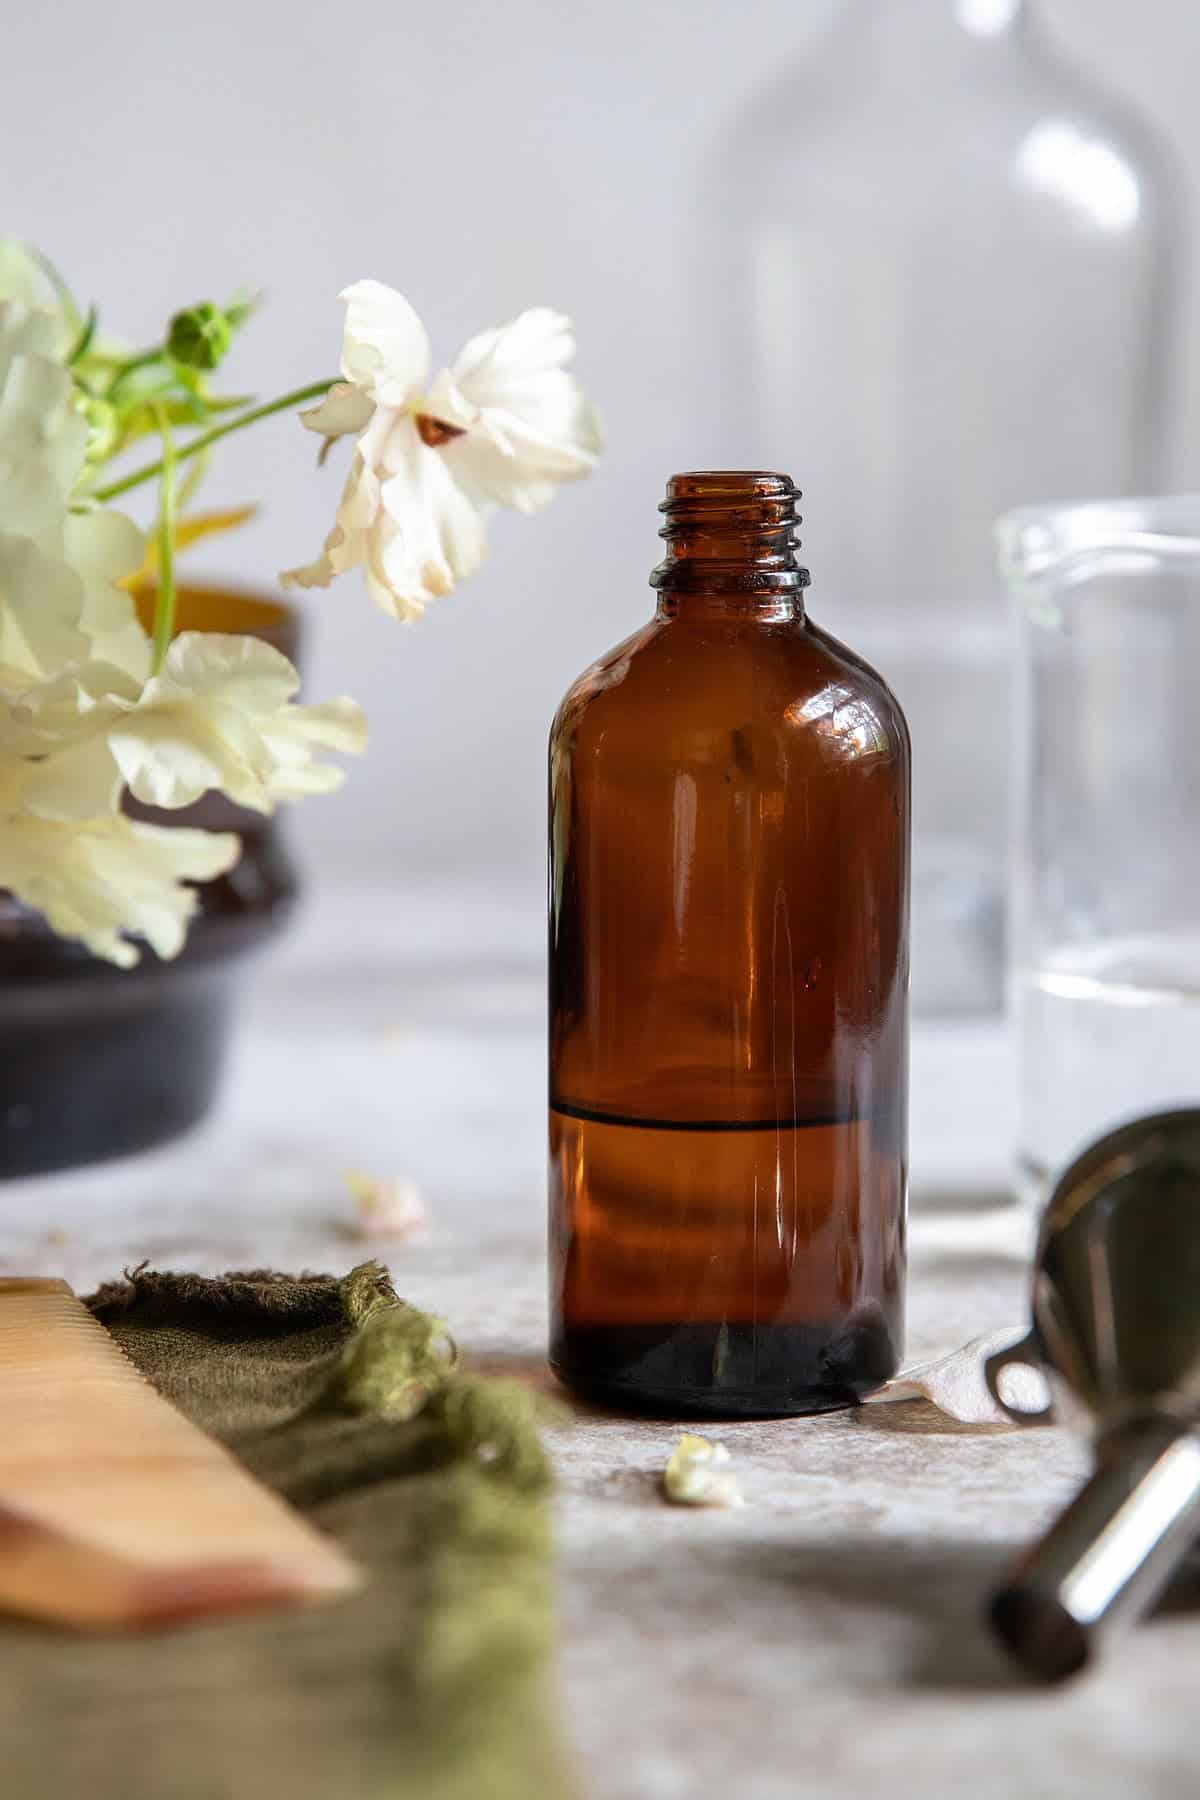 Letting alcohol and essential oils fully combine for hair perfume blends